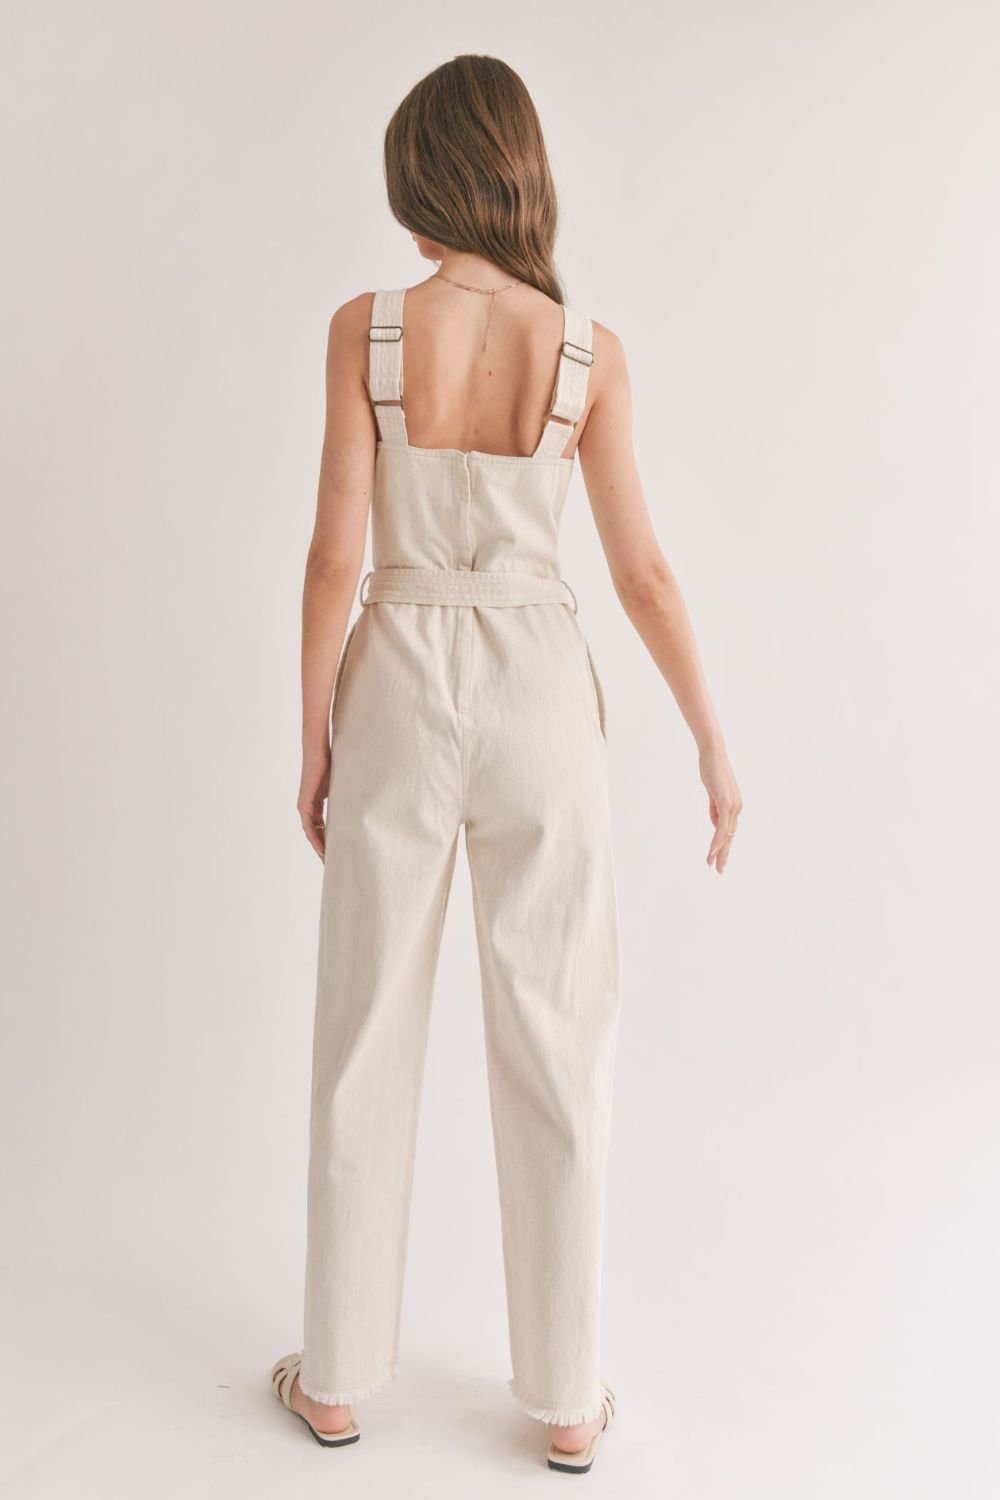 Women&#39;s Cotton Denim Overalls | Oatmeal - Women&#39;s Jumpsuit - Blooming Daily